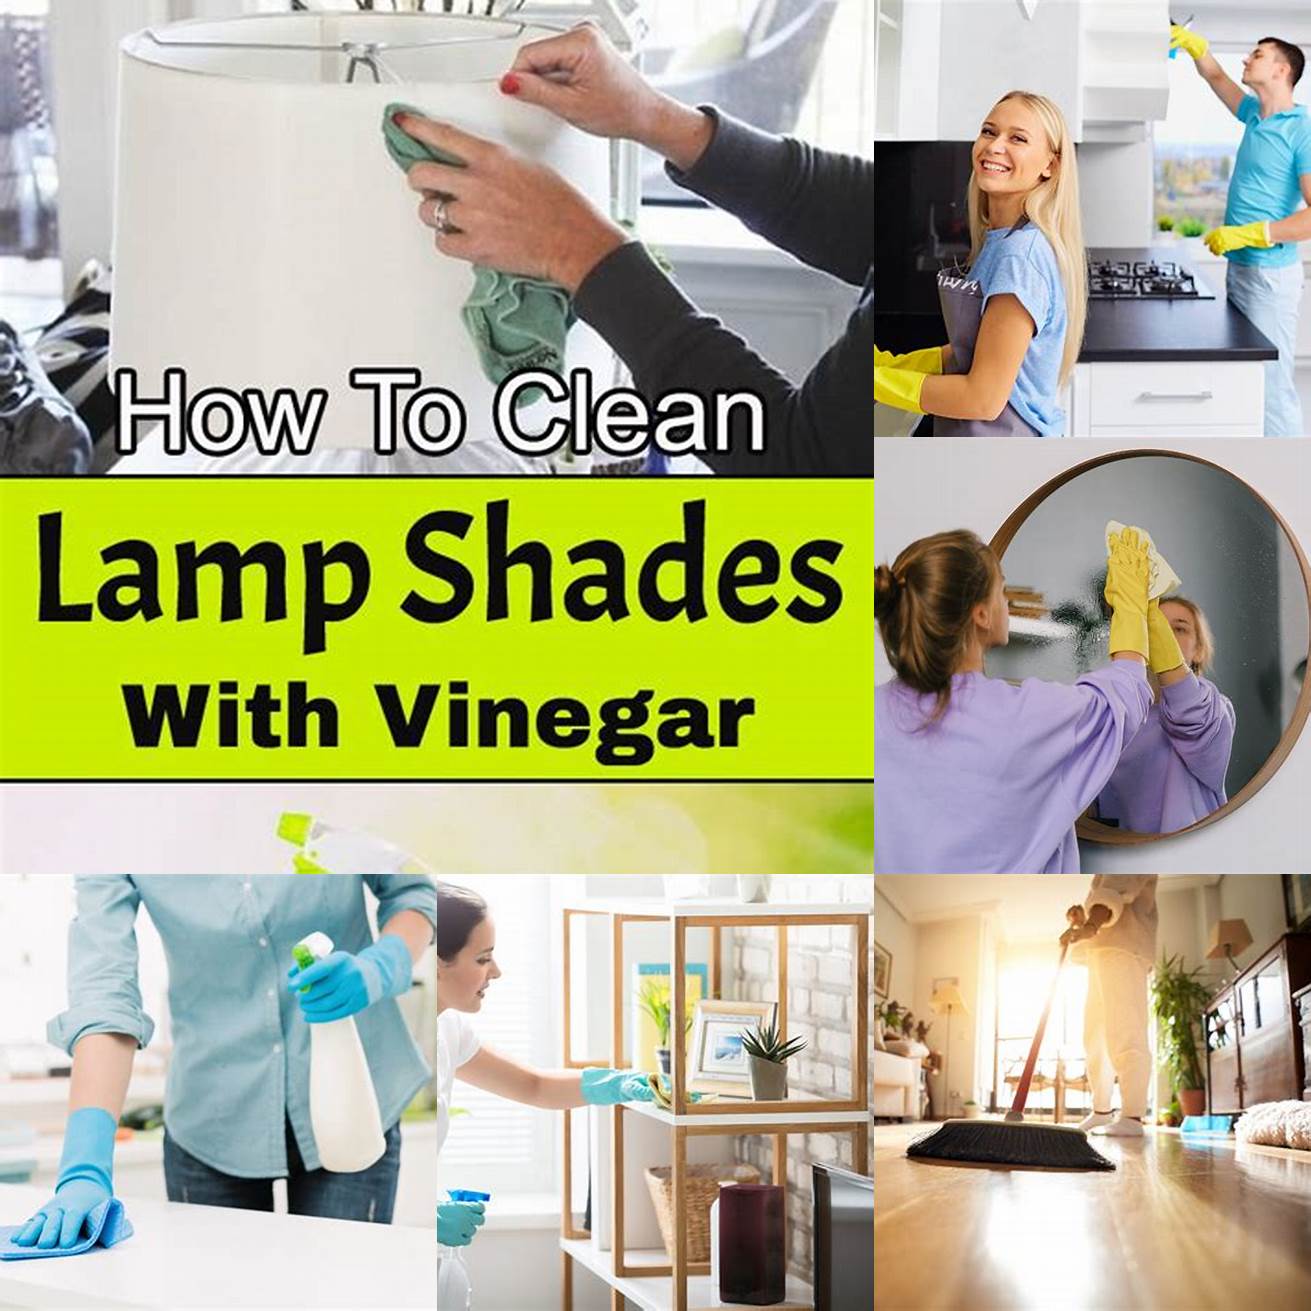 1 Clean your lighting regularly